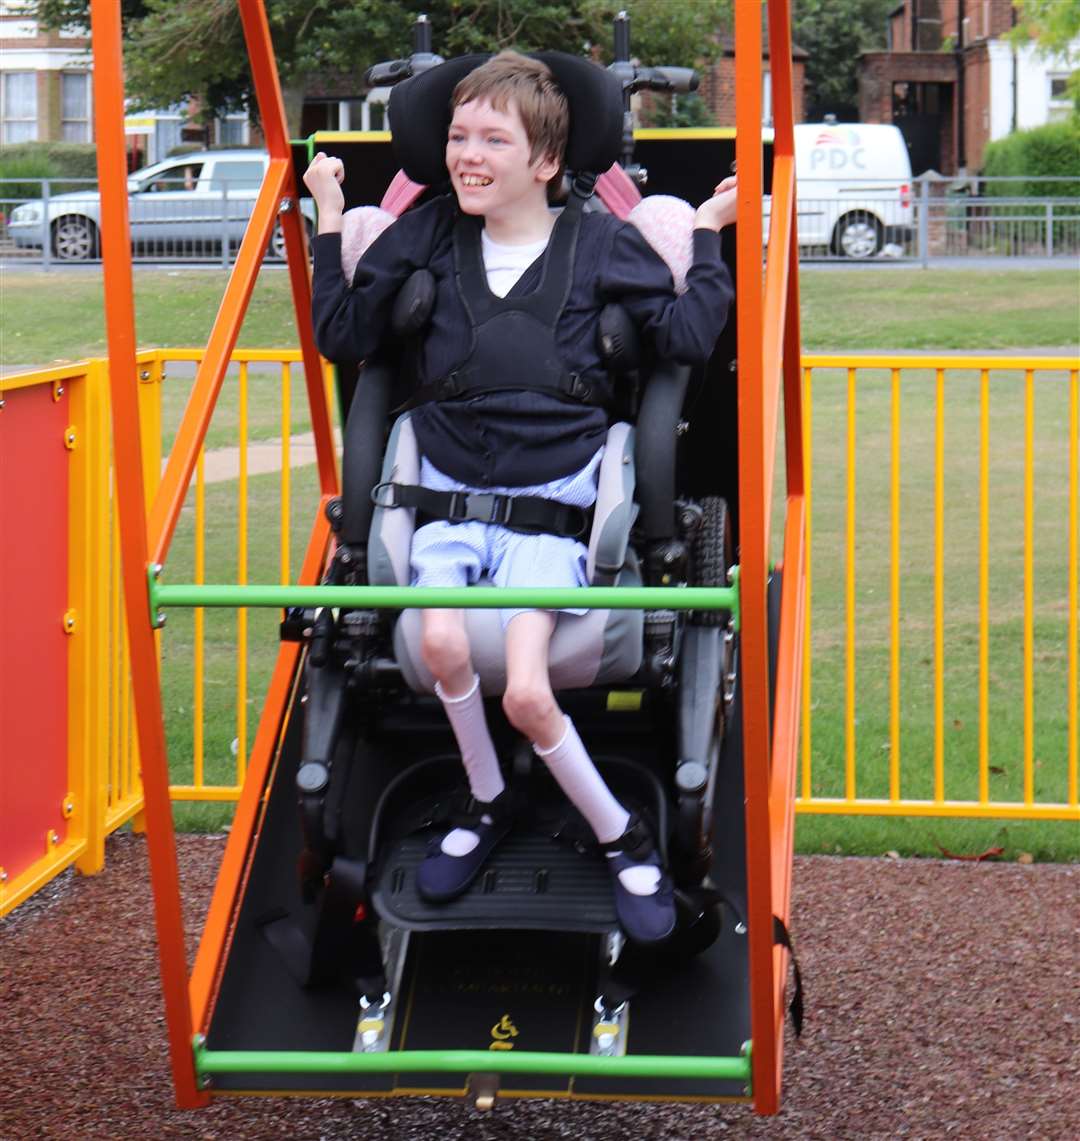 Amber from Beacon Park School tries out the new wheelchair swing in Radnor Park, Folkestone